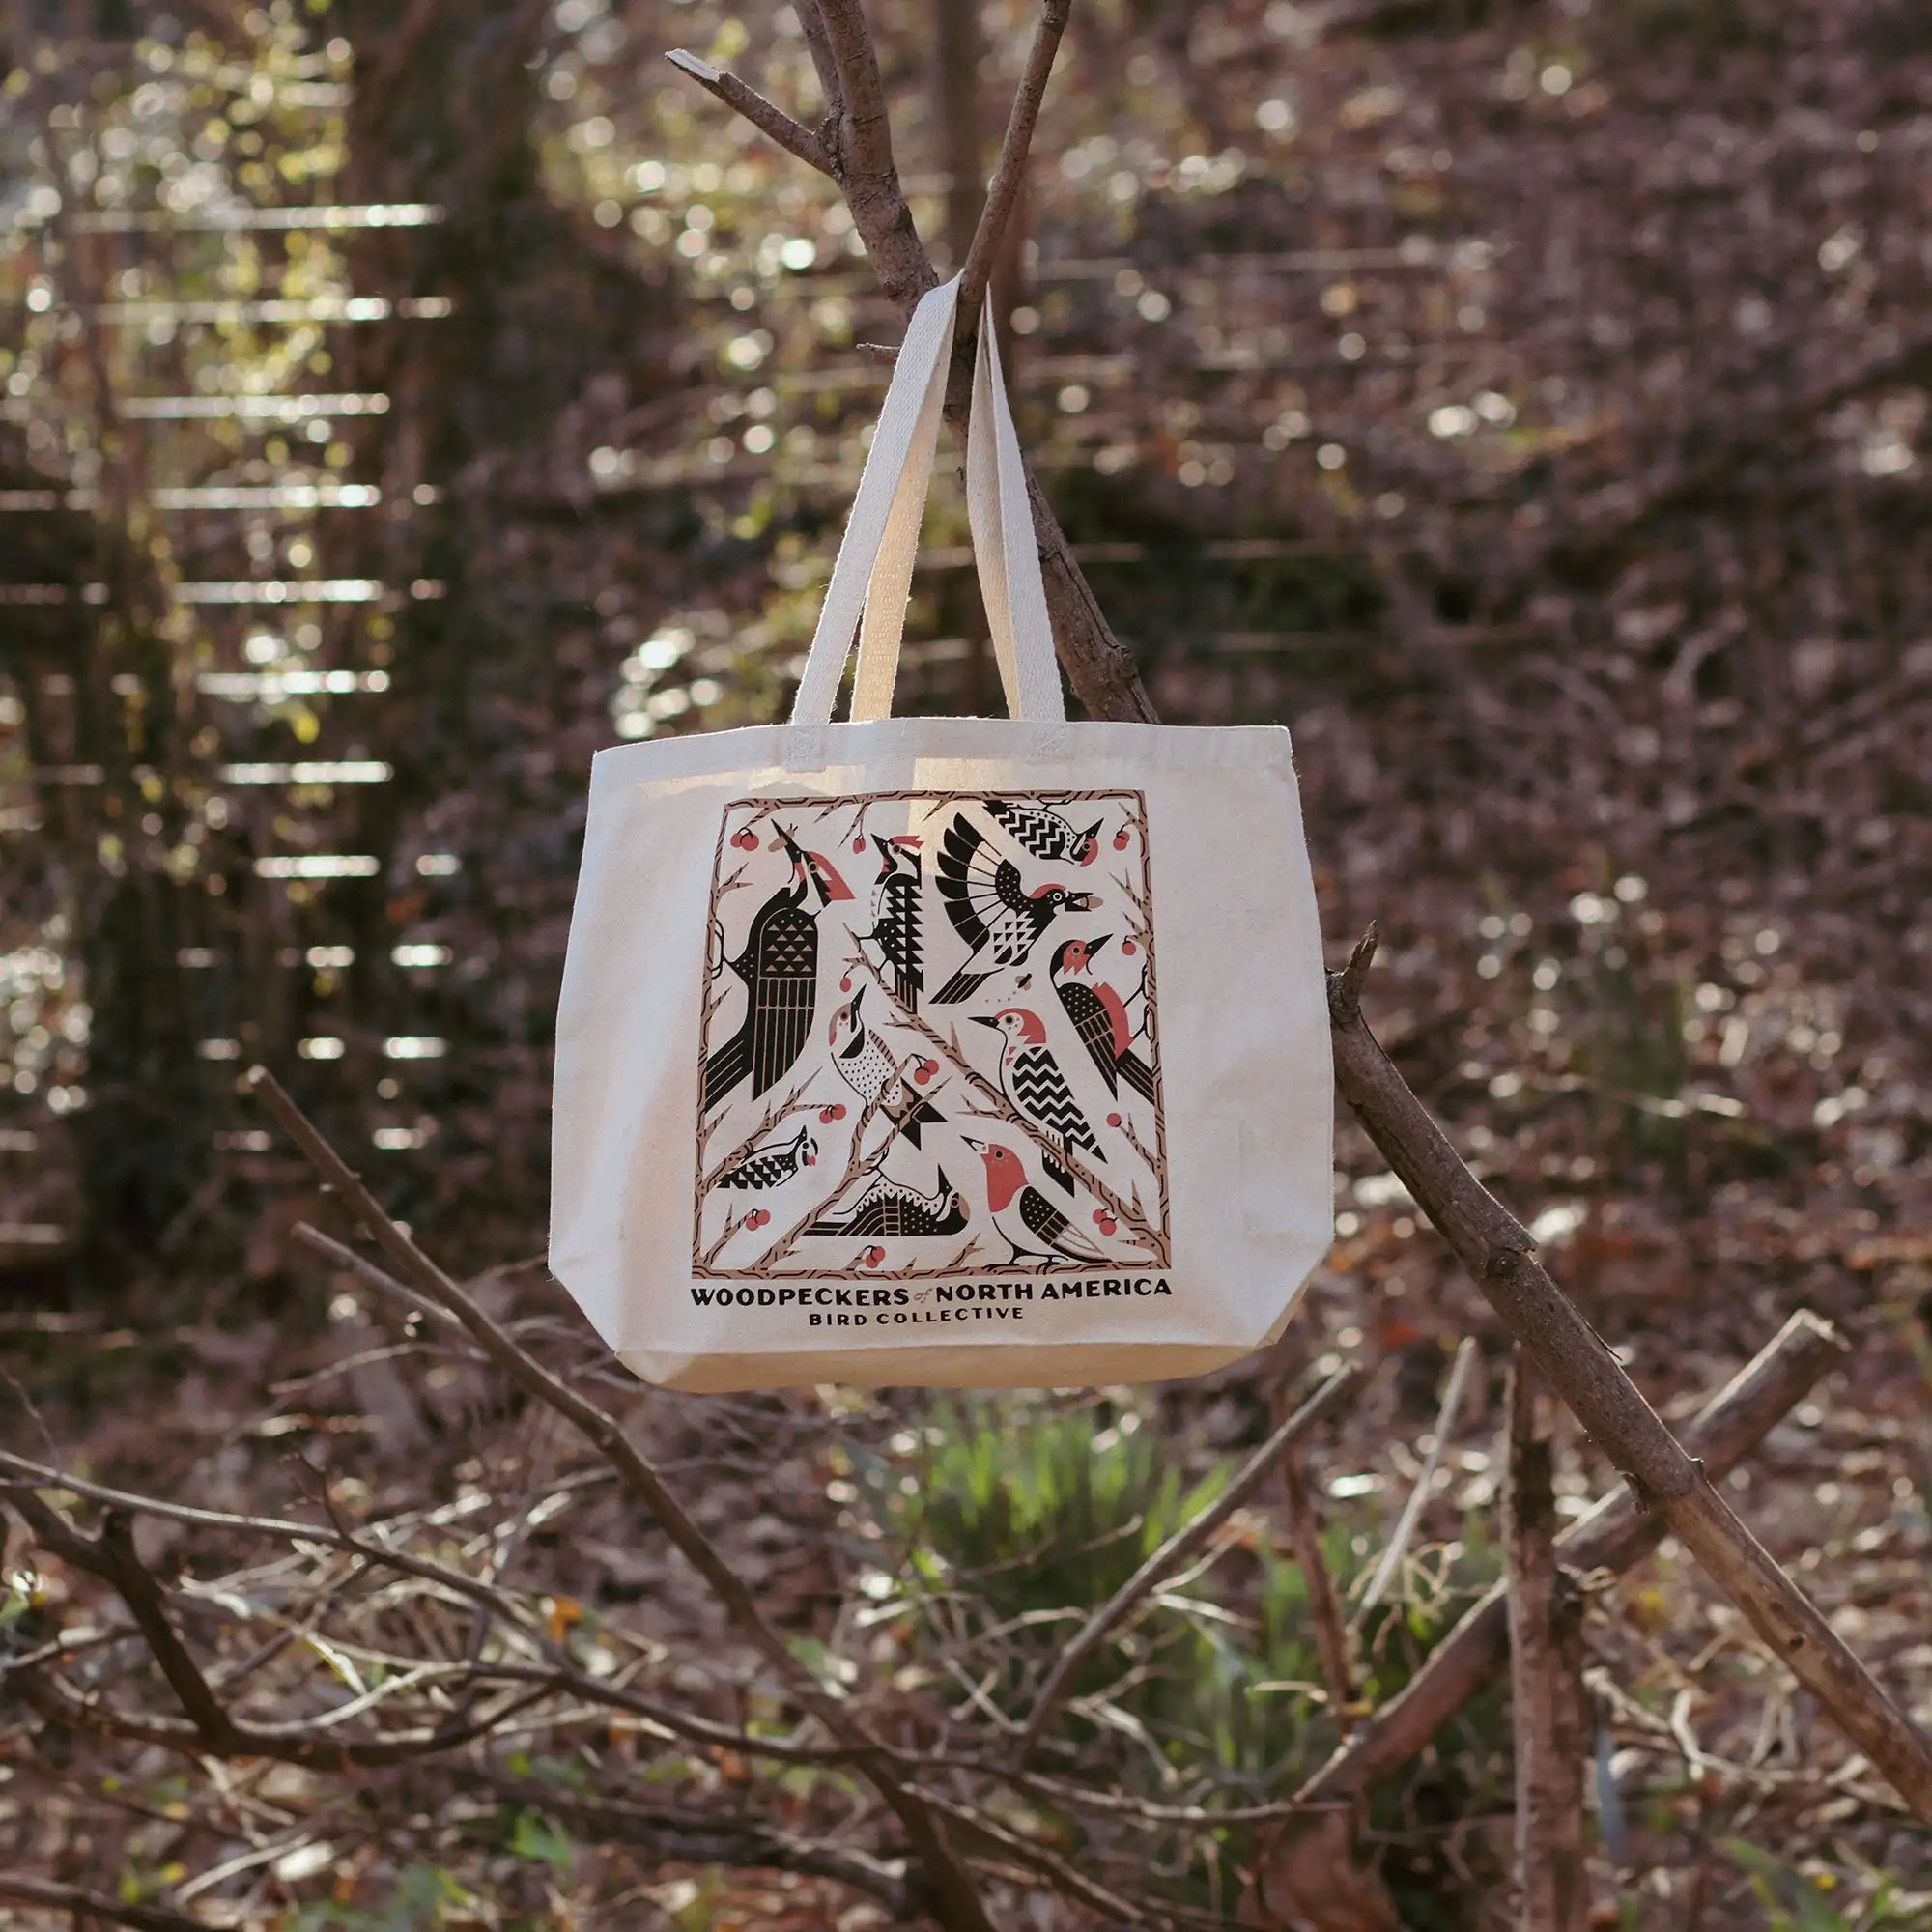 Bird Collective - Woodpeckers of North America Tote Bag - -